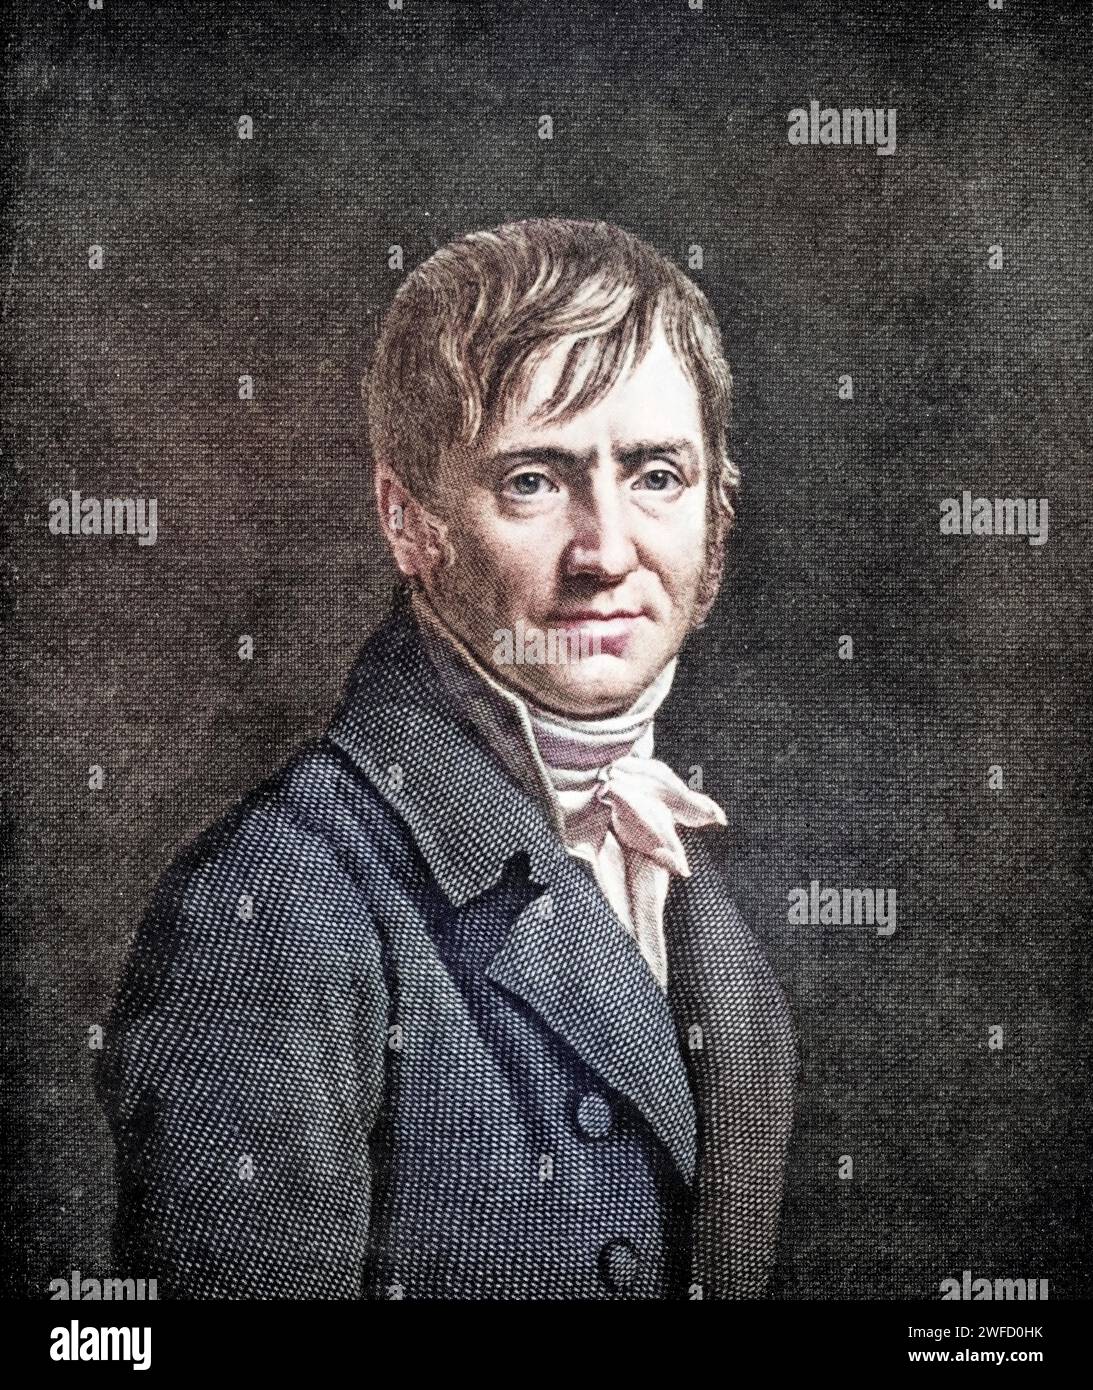 colorized Portrait of Pierre-Joseph Redouté (10 July 1759 – 19 June 1840), was a painter and botanist from Belgium, known for his watercolours of roses, lilies and other flowers at the Château de Malmaison, many of which were published as large coloured stipple engravings. He was nicknamed 'the Raphael of flowers' and has been called the greatest botanical illustrator of all time. Stock Photo